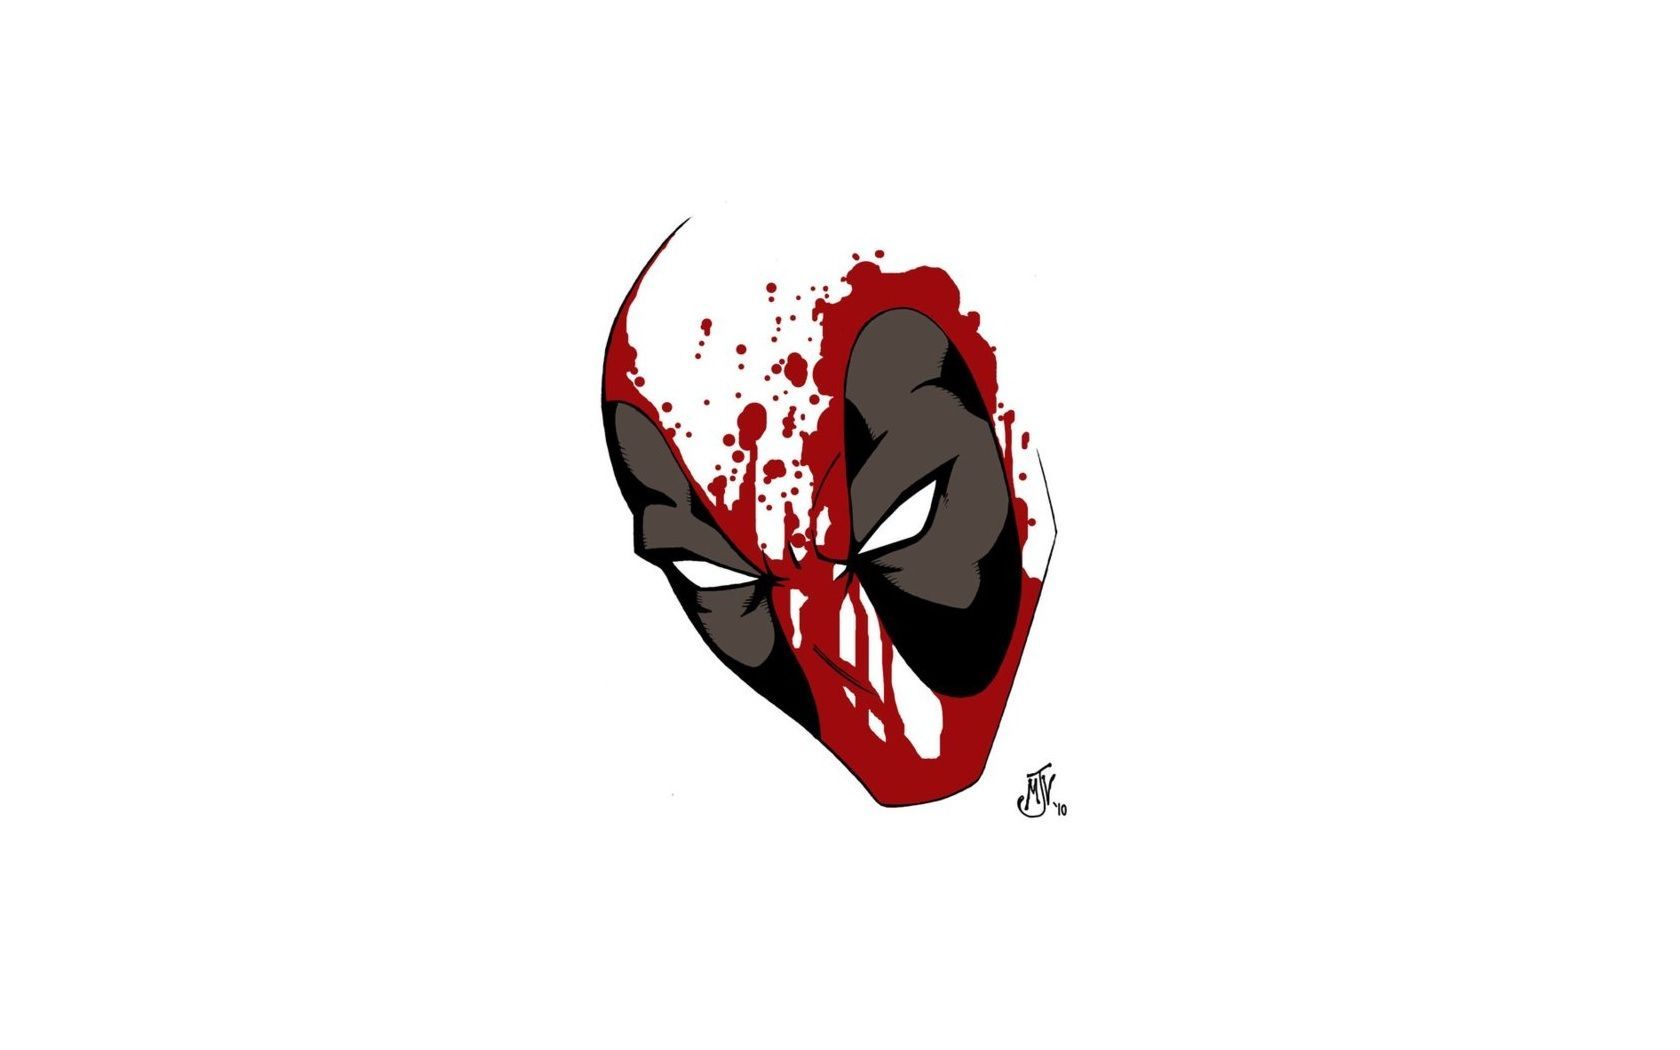 You guys want some Deadpool wallpapers? - Album on Imgur